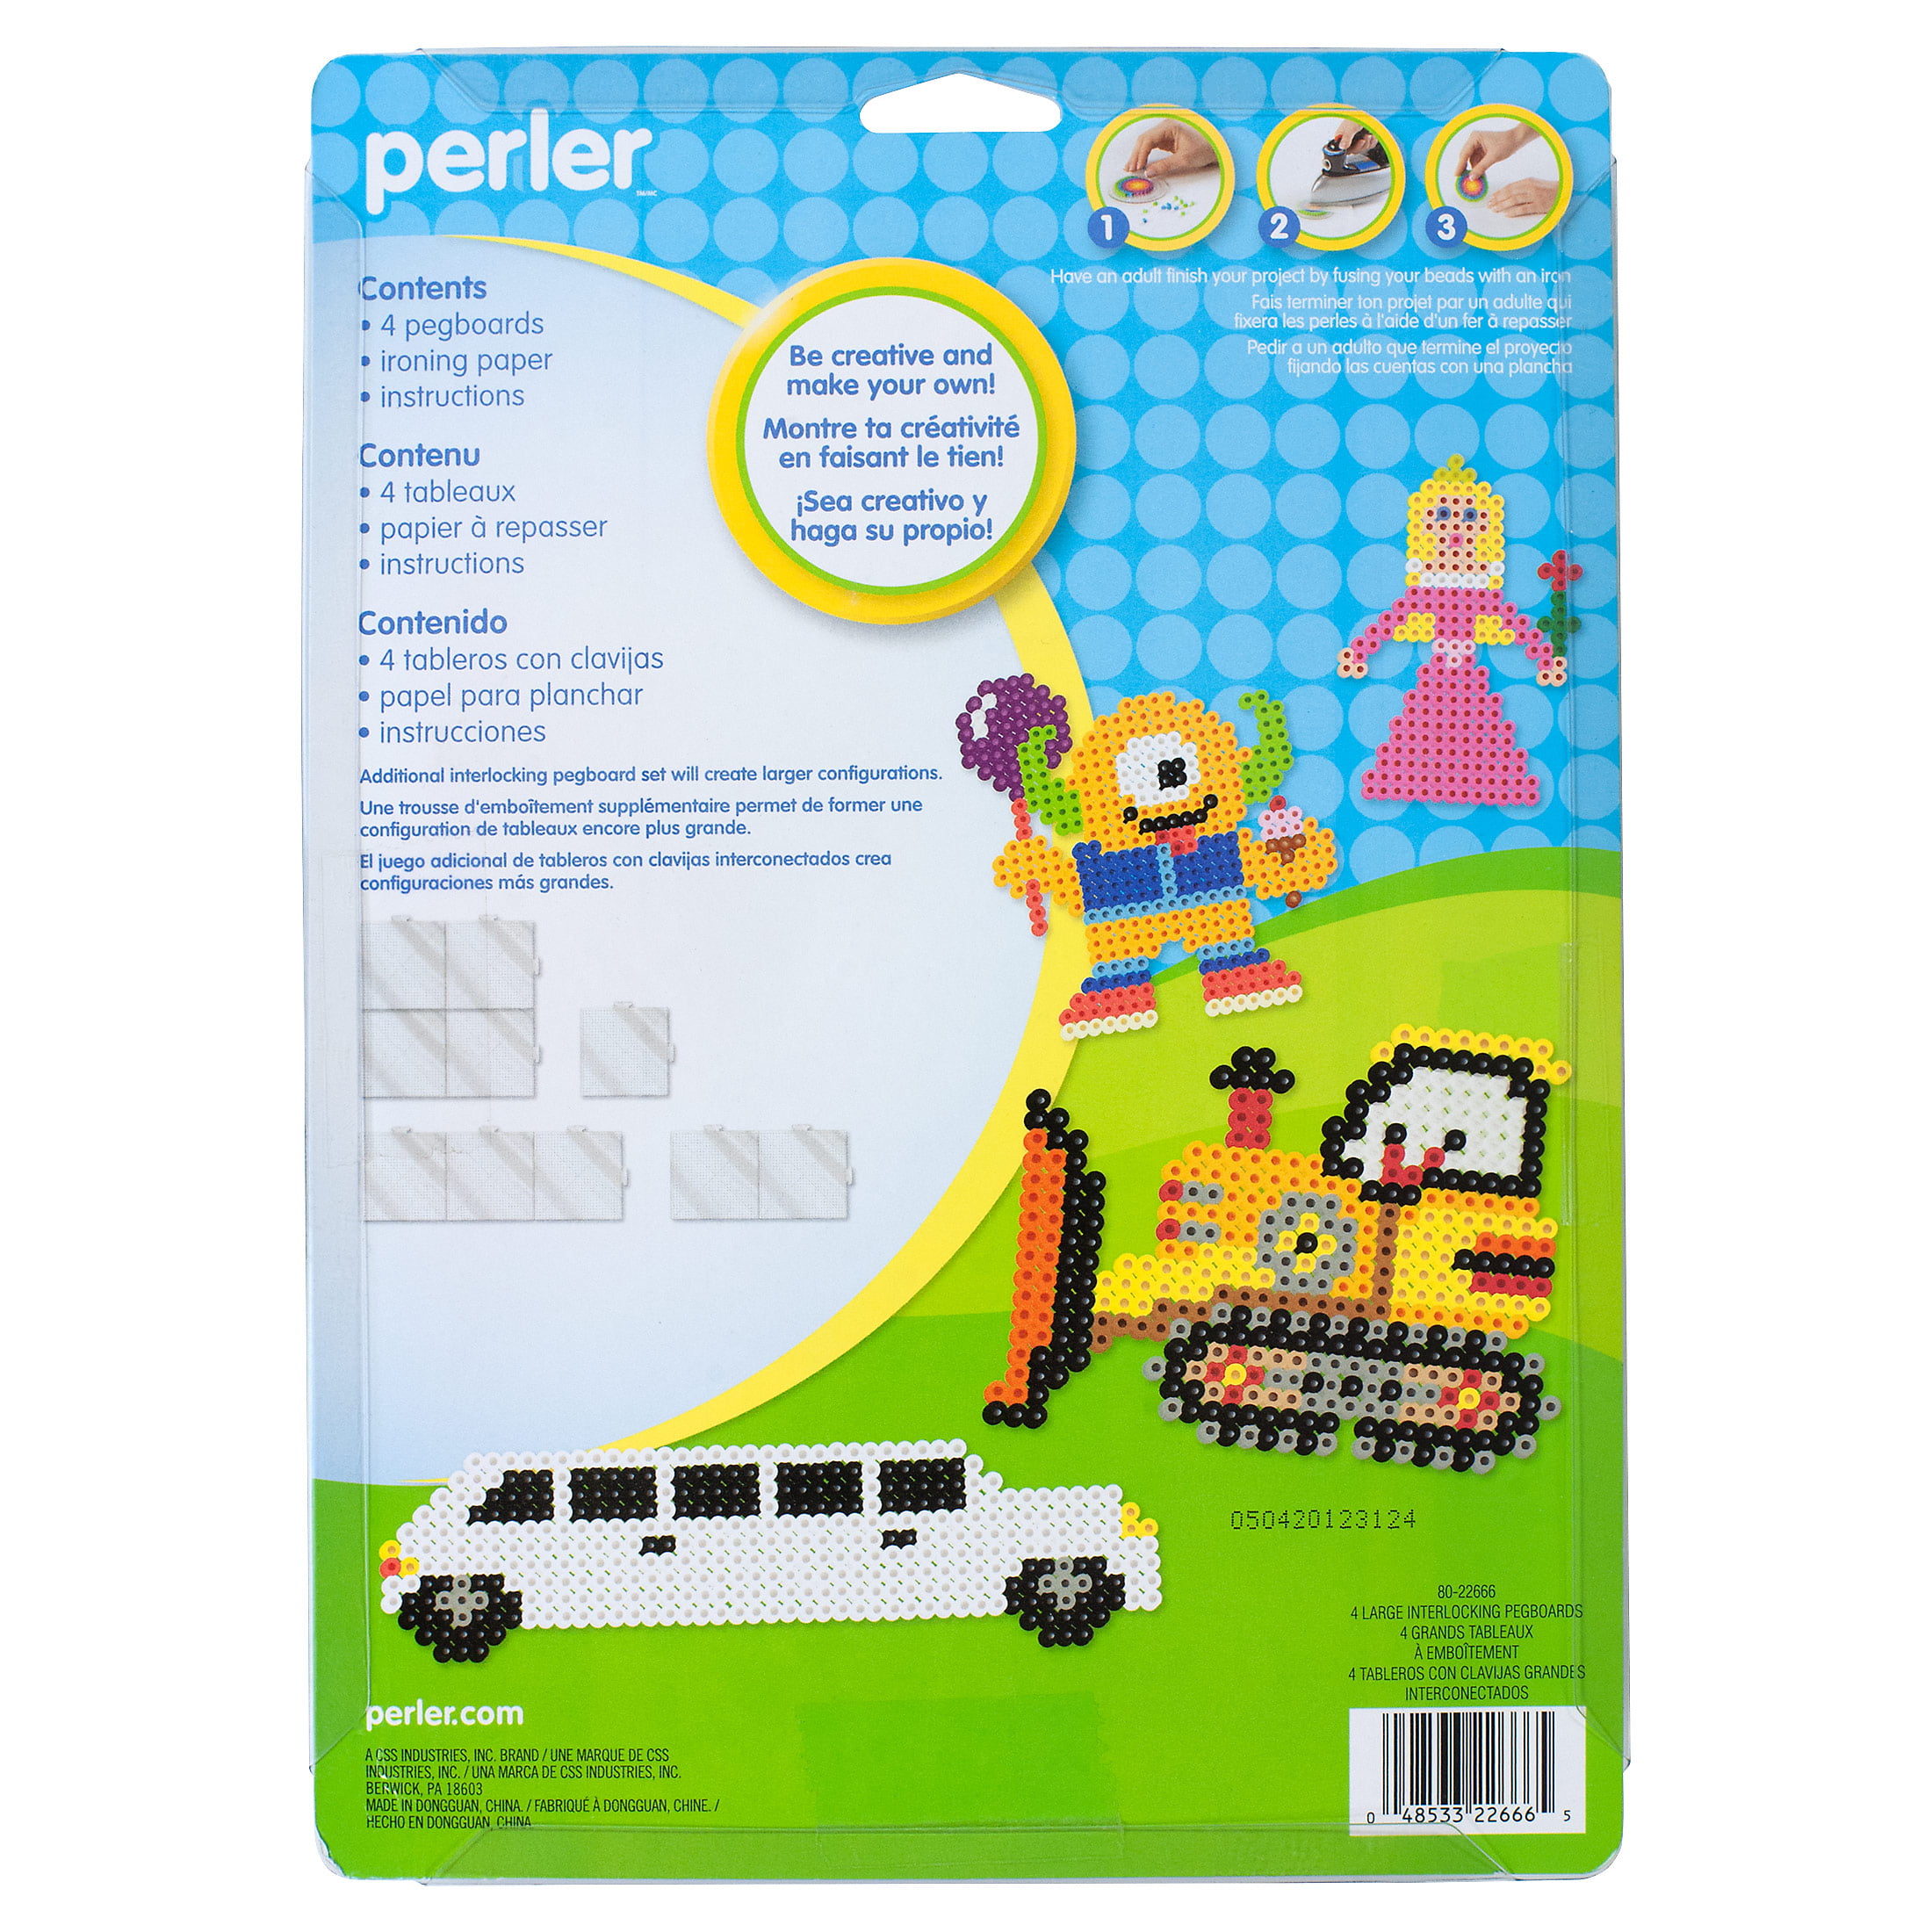 Perler Beads Assorted Small and Large Pegboards for Kid's Crafts - (5)  clear Perler pegboards, (1) sheet of reusable ironing paper, 6 pcs